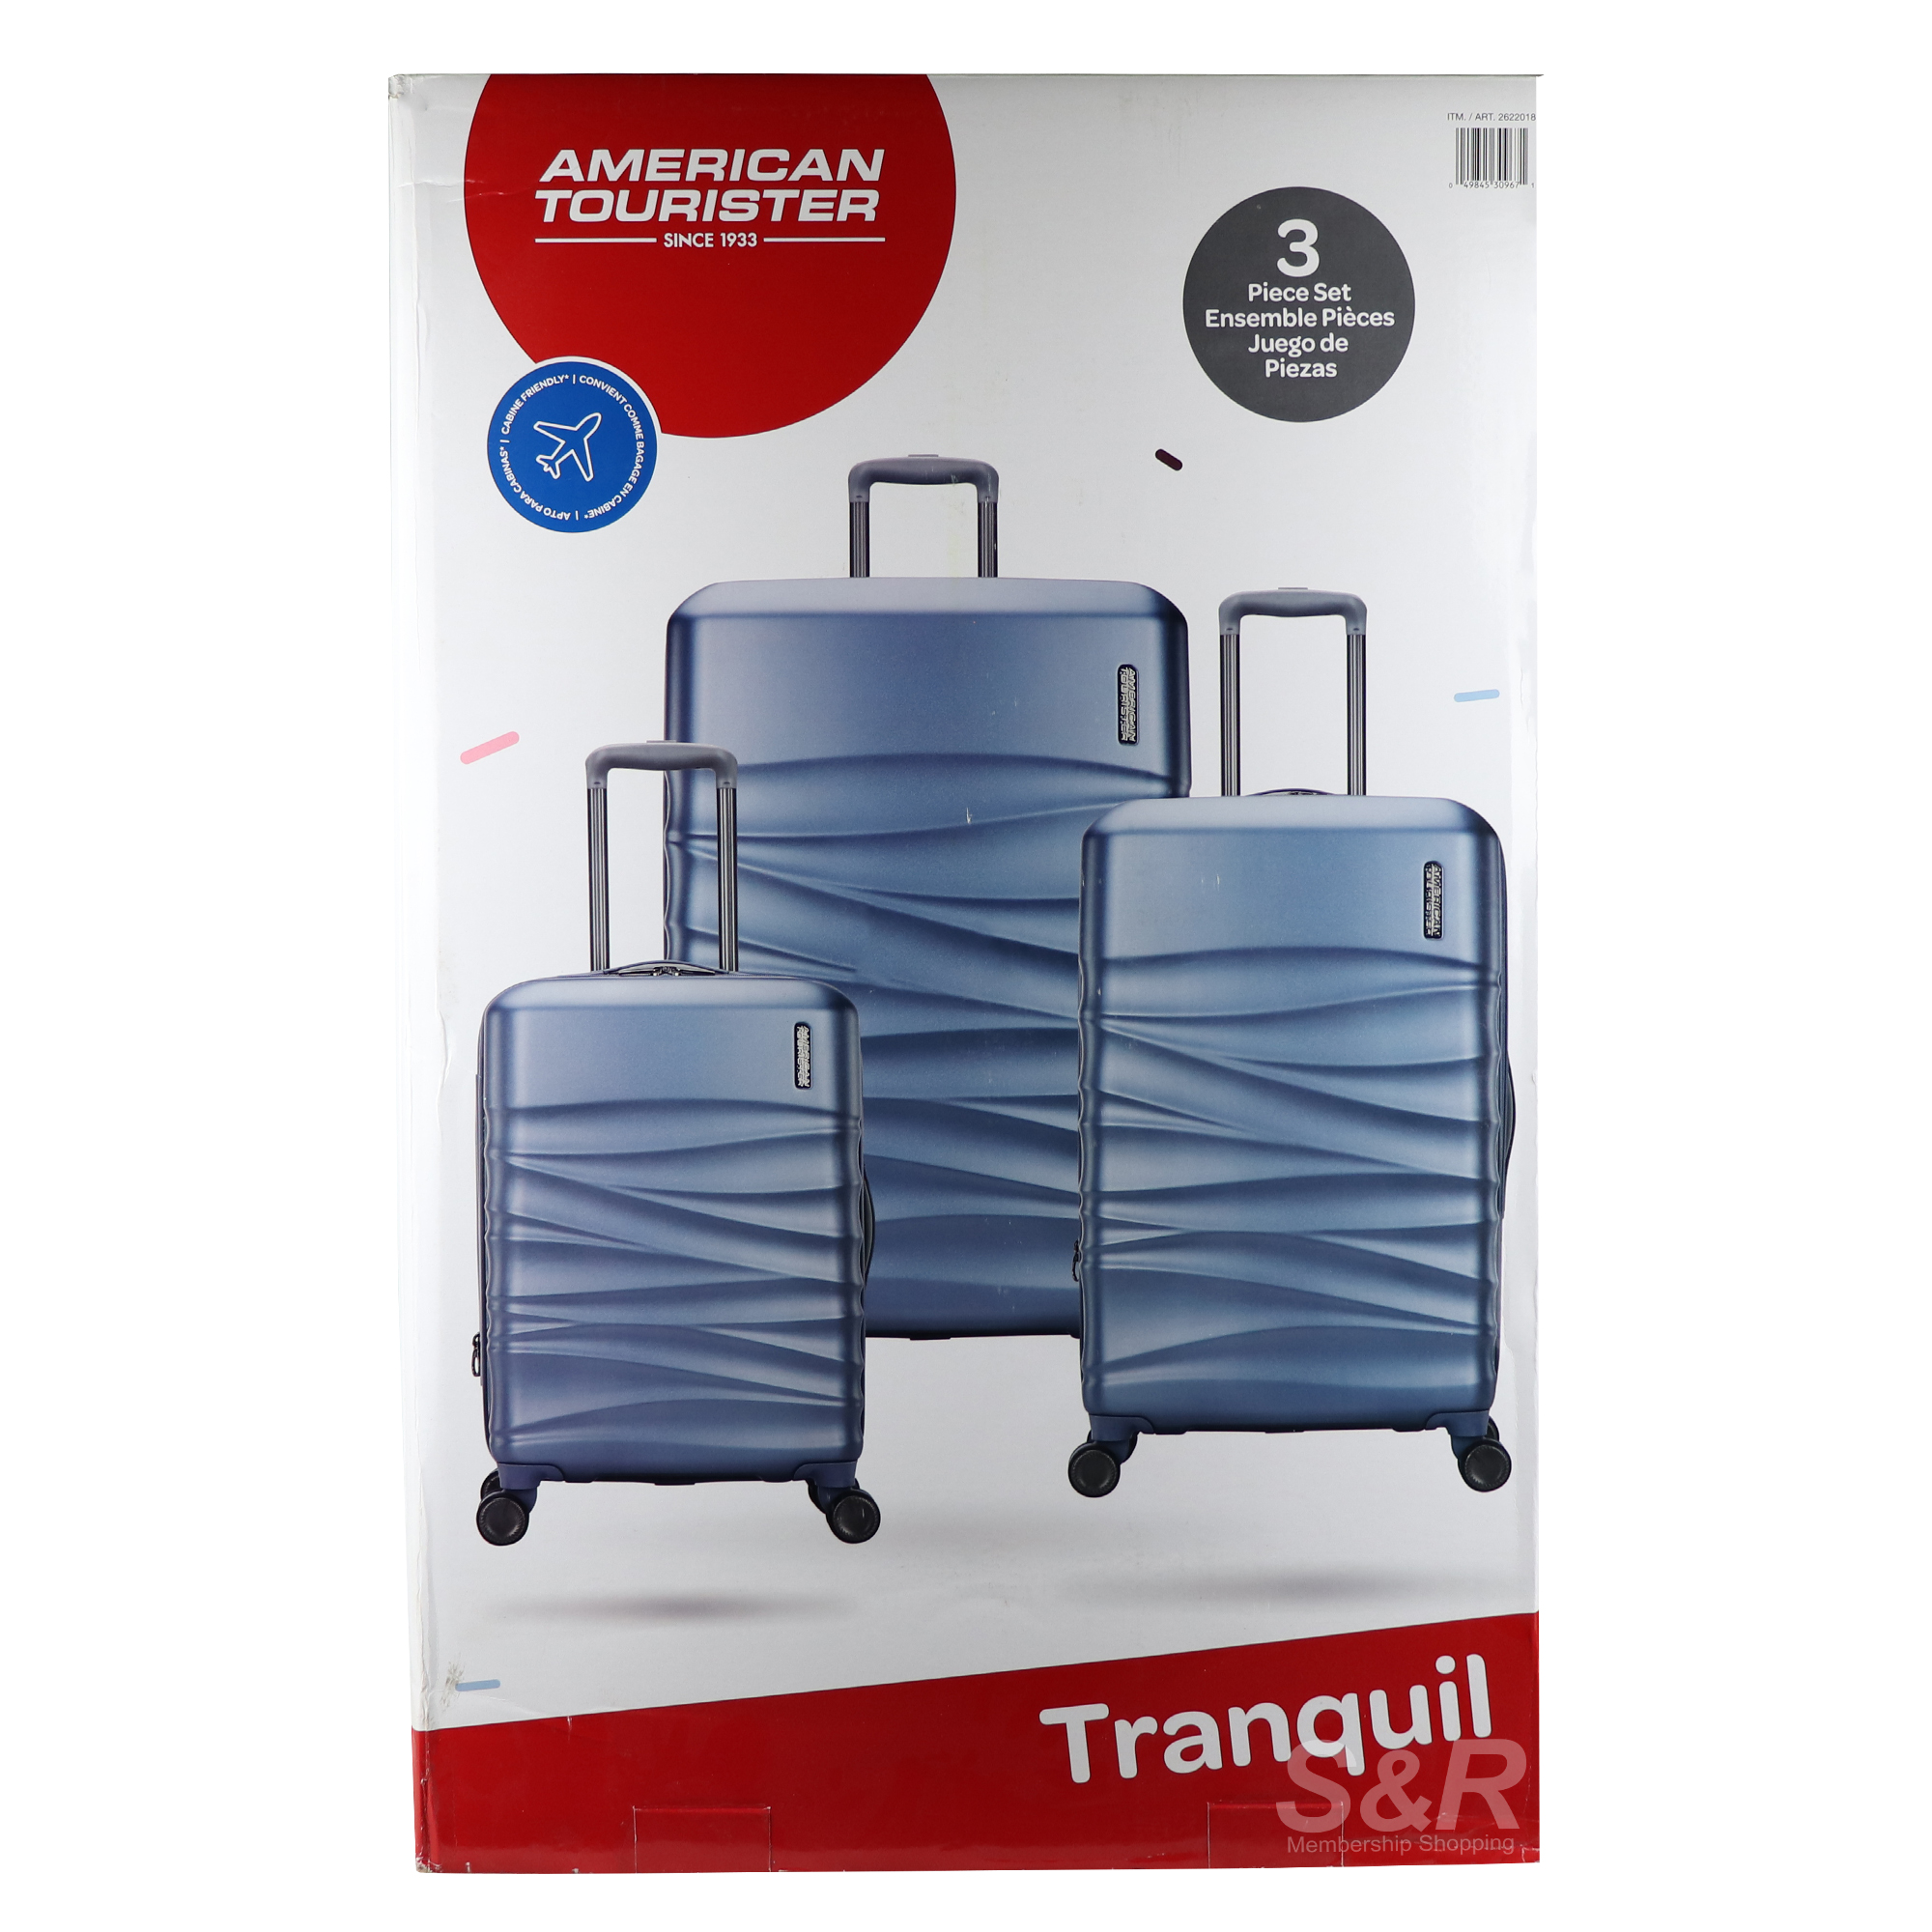 American Tourister Tranquil 3pc set